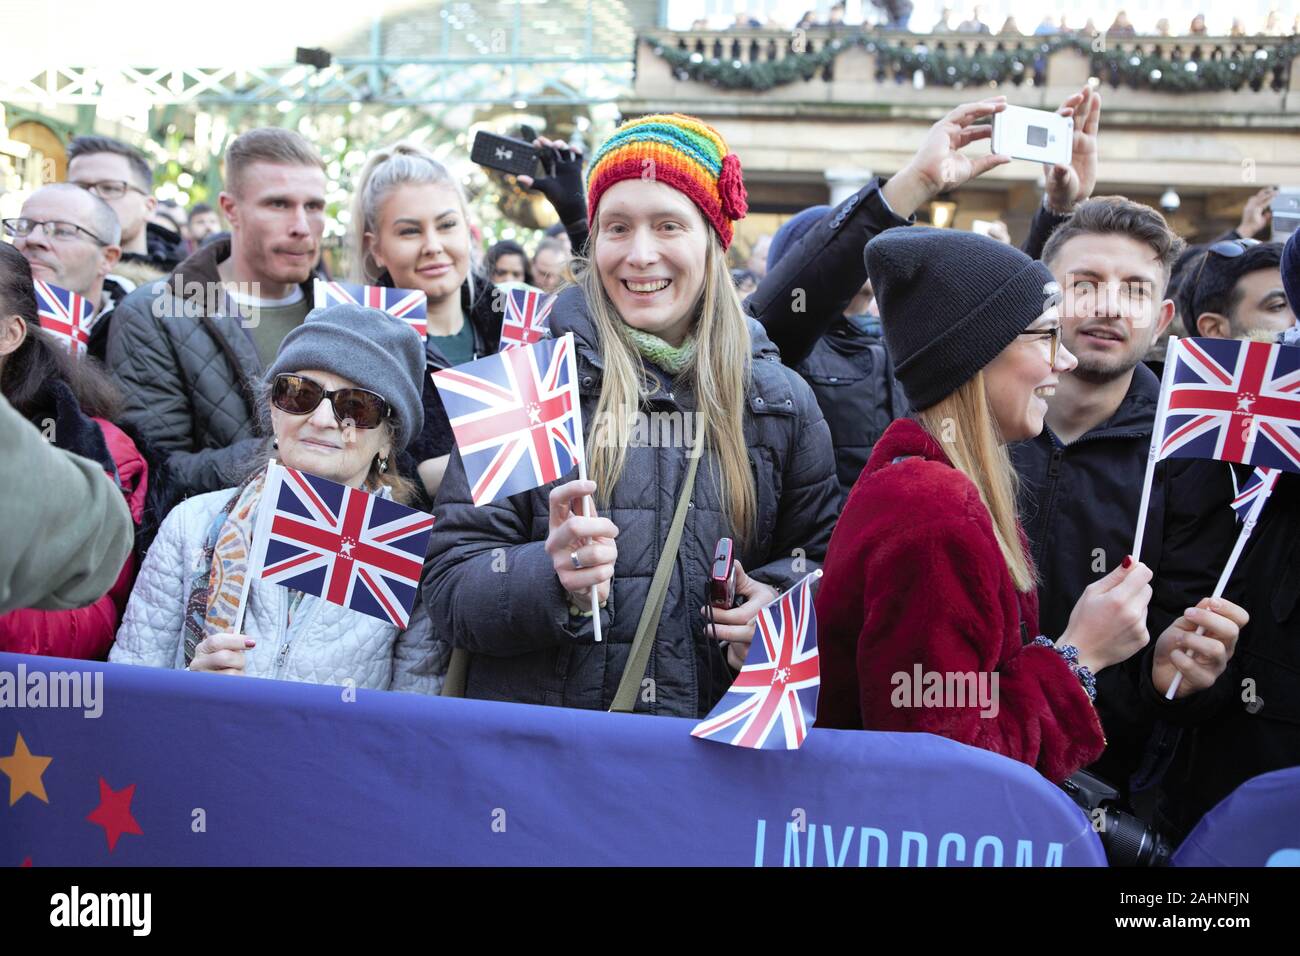 London, UK. 30th Dec, 2019. Spectators holding UK Flags during London's New Year's Day Parade (LNYDP) 2020 Preview Show at Covent Garden Piazza. Credit: Pietro Recchia/SOPA Images/ZUMA Wire/Alamy Live News Stock Photo